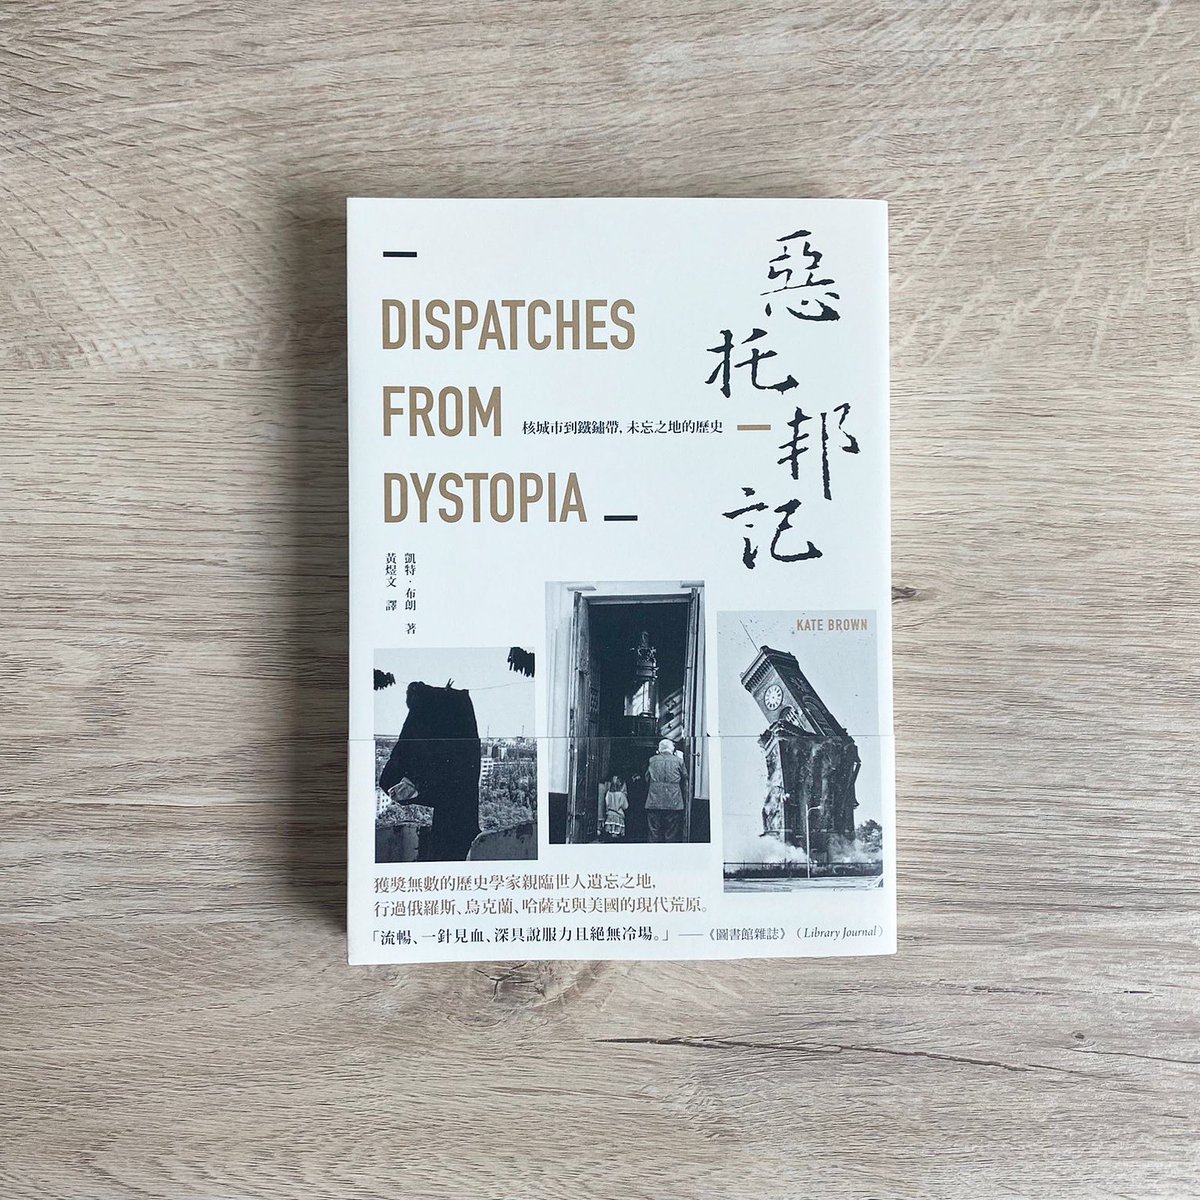 Dispatches from Dystopia: Histories of Places Not Yet Forgotten offers a haunting glimpse into the horrors of the past and what they show about our possible futures. This is an absolute MUST READ!

#nonfiction #chernobyl #univeristyofchicagopress #translatedbooks